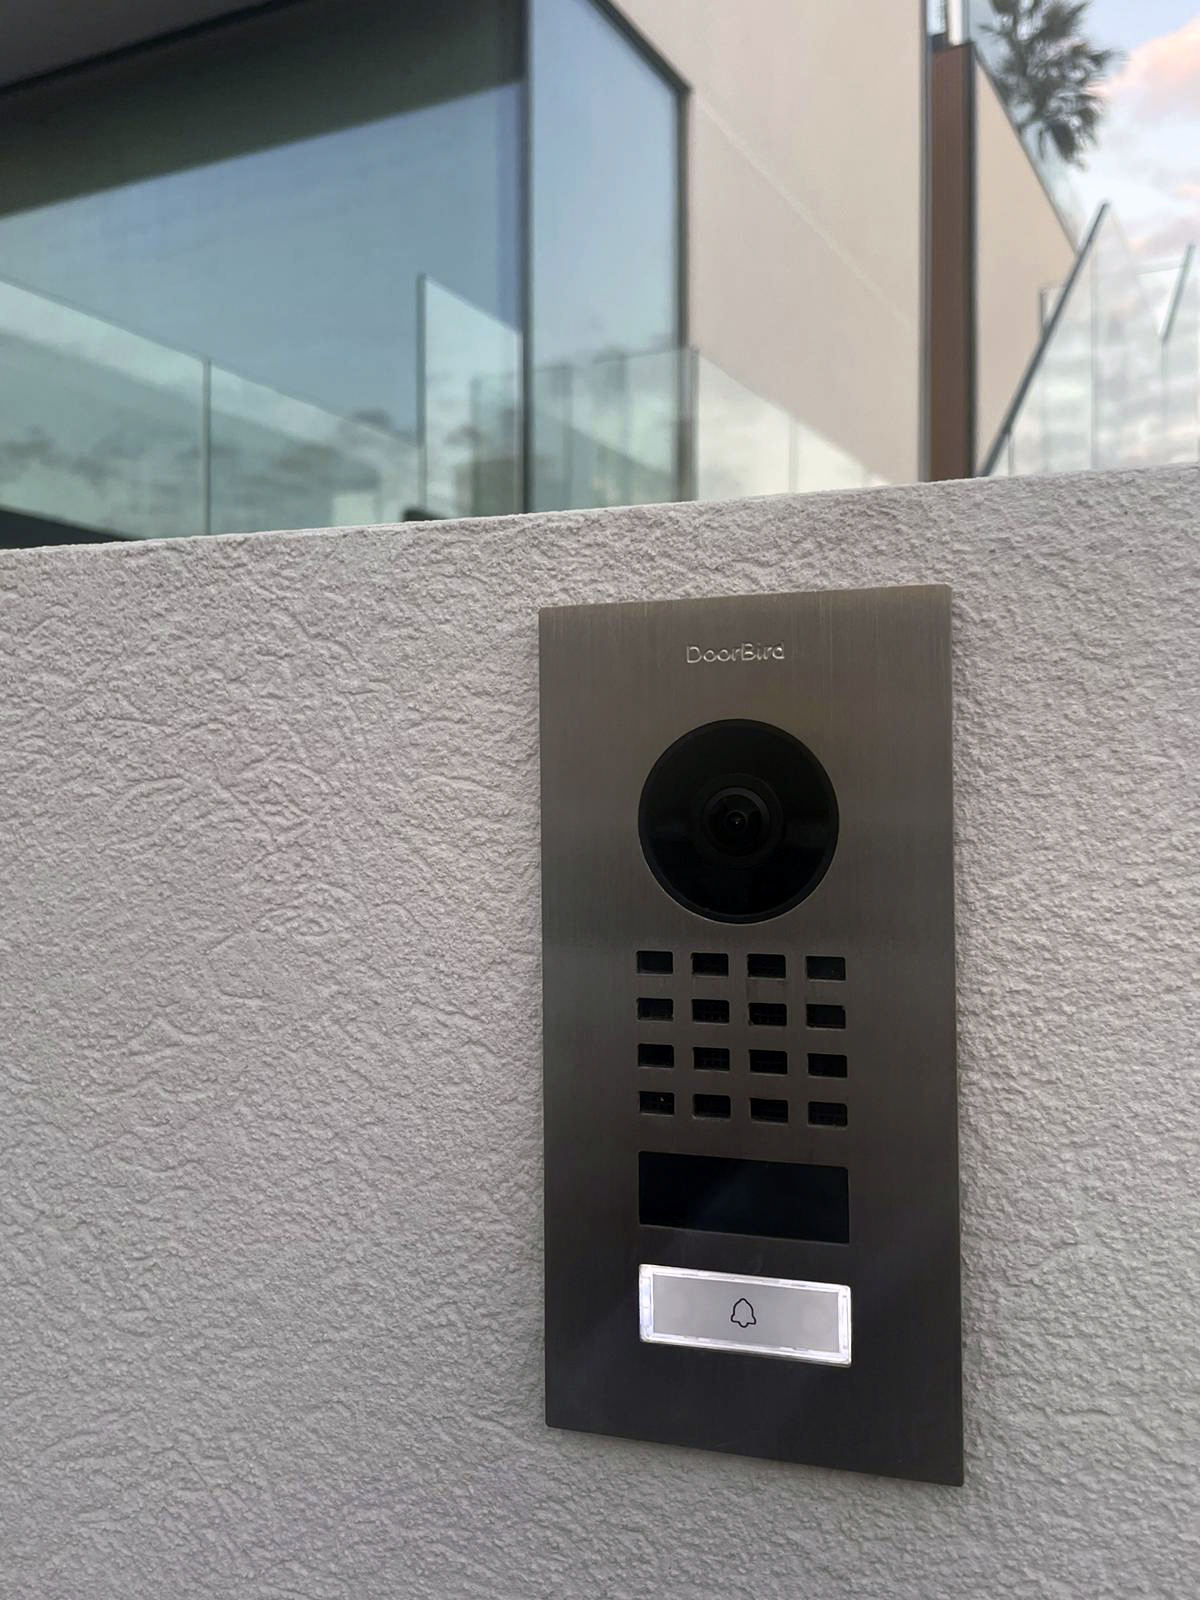 Astral projects door bird Smart Lighting and Audio Control System